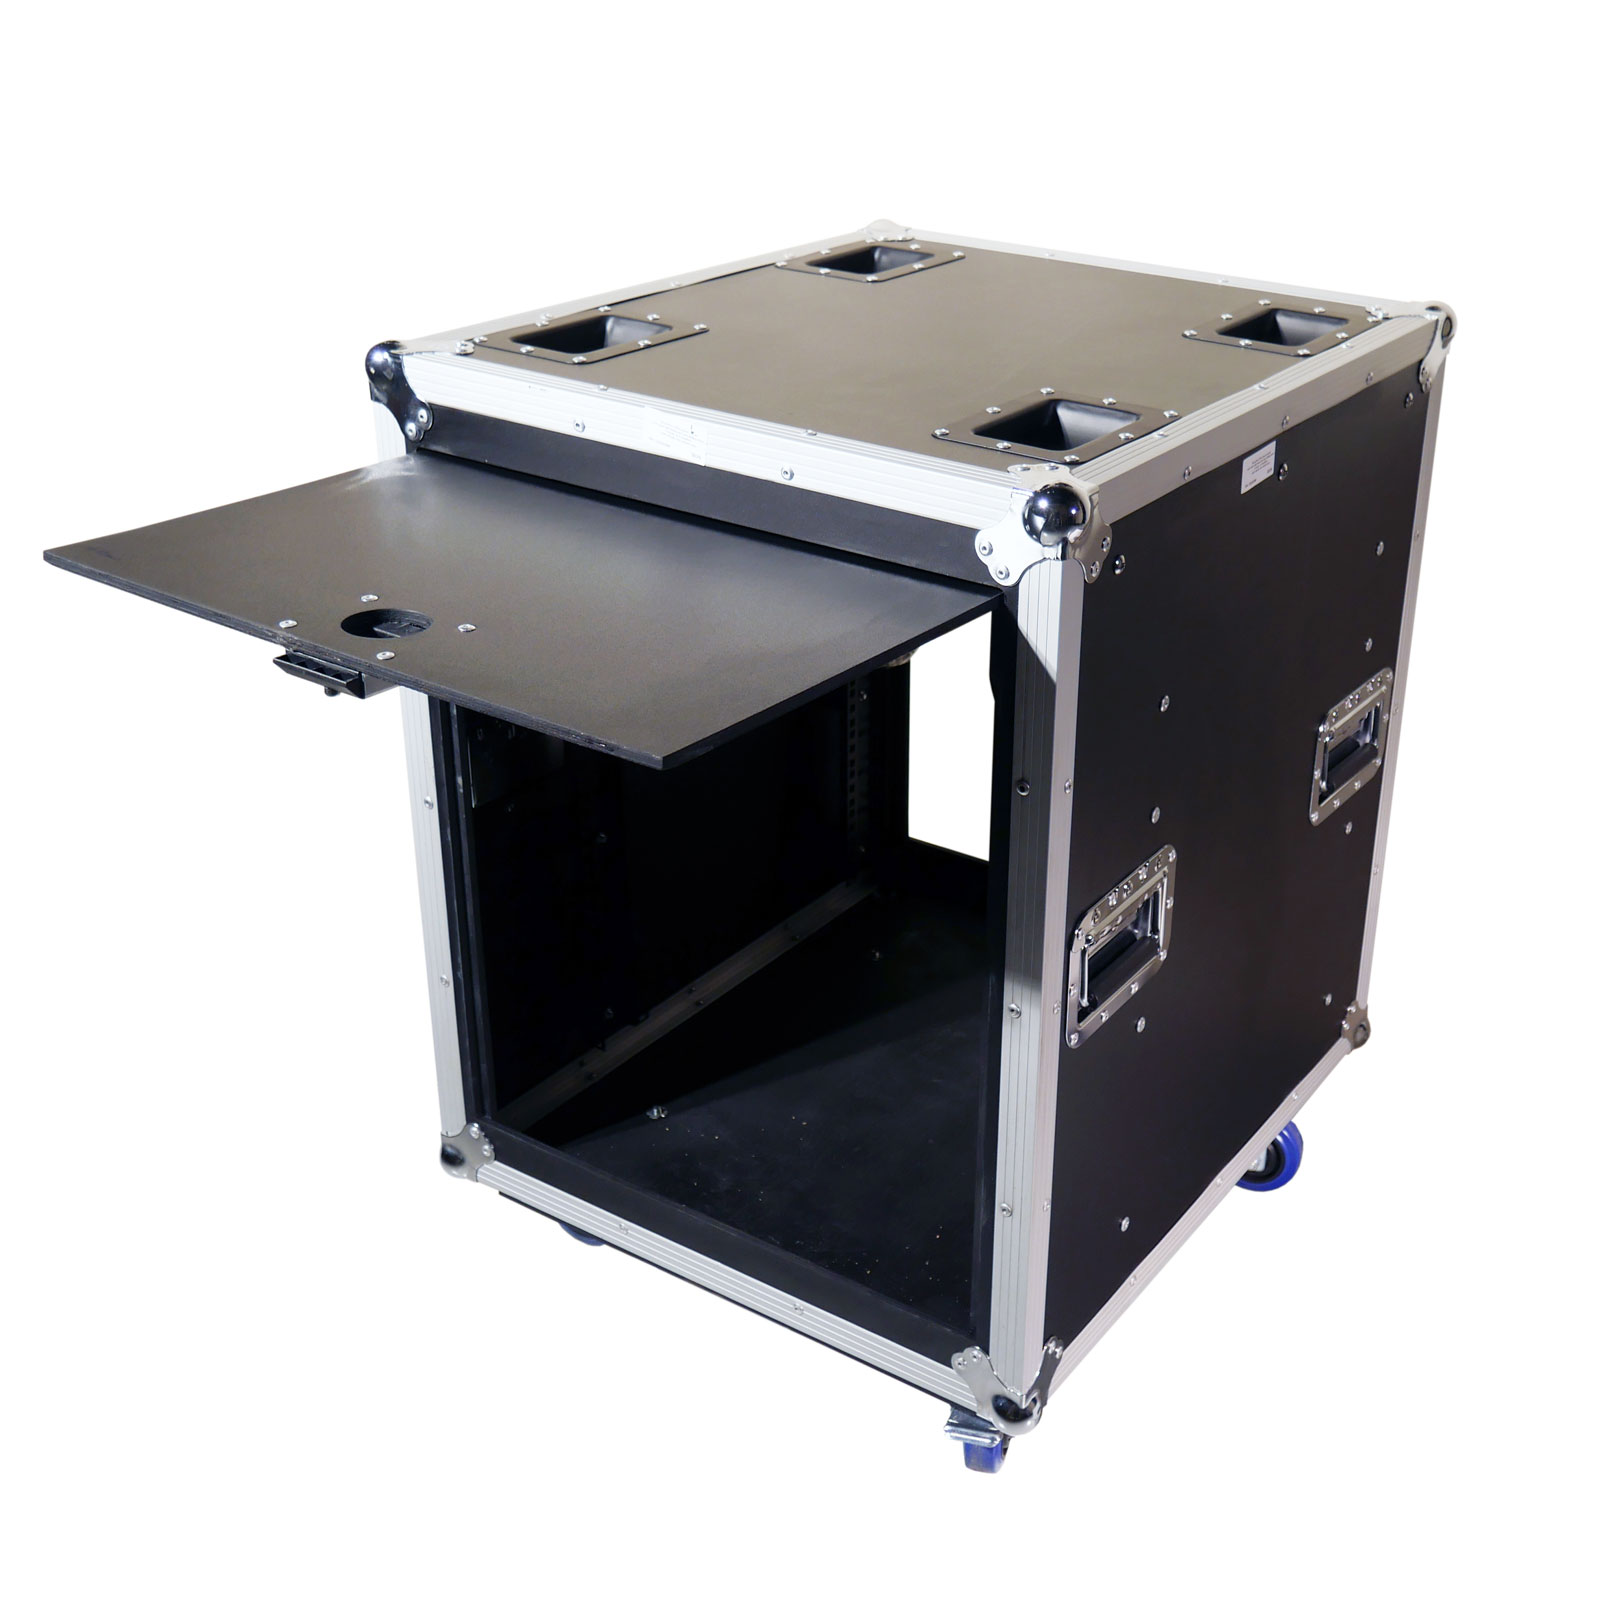 Bravopro 12ru Shock Mount Rack Case With Front And Rear Sliding Doors With Wheels And Wheel Cups